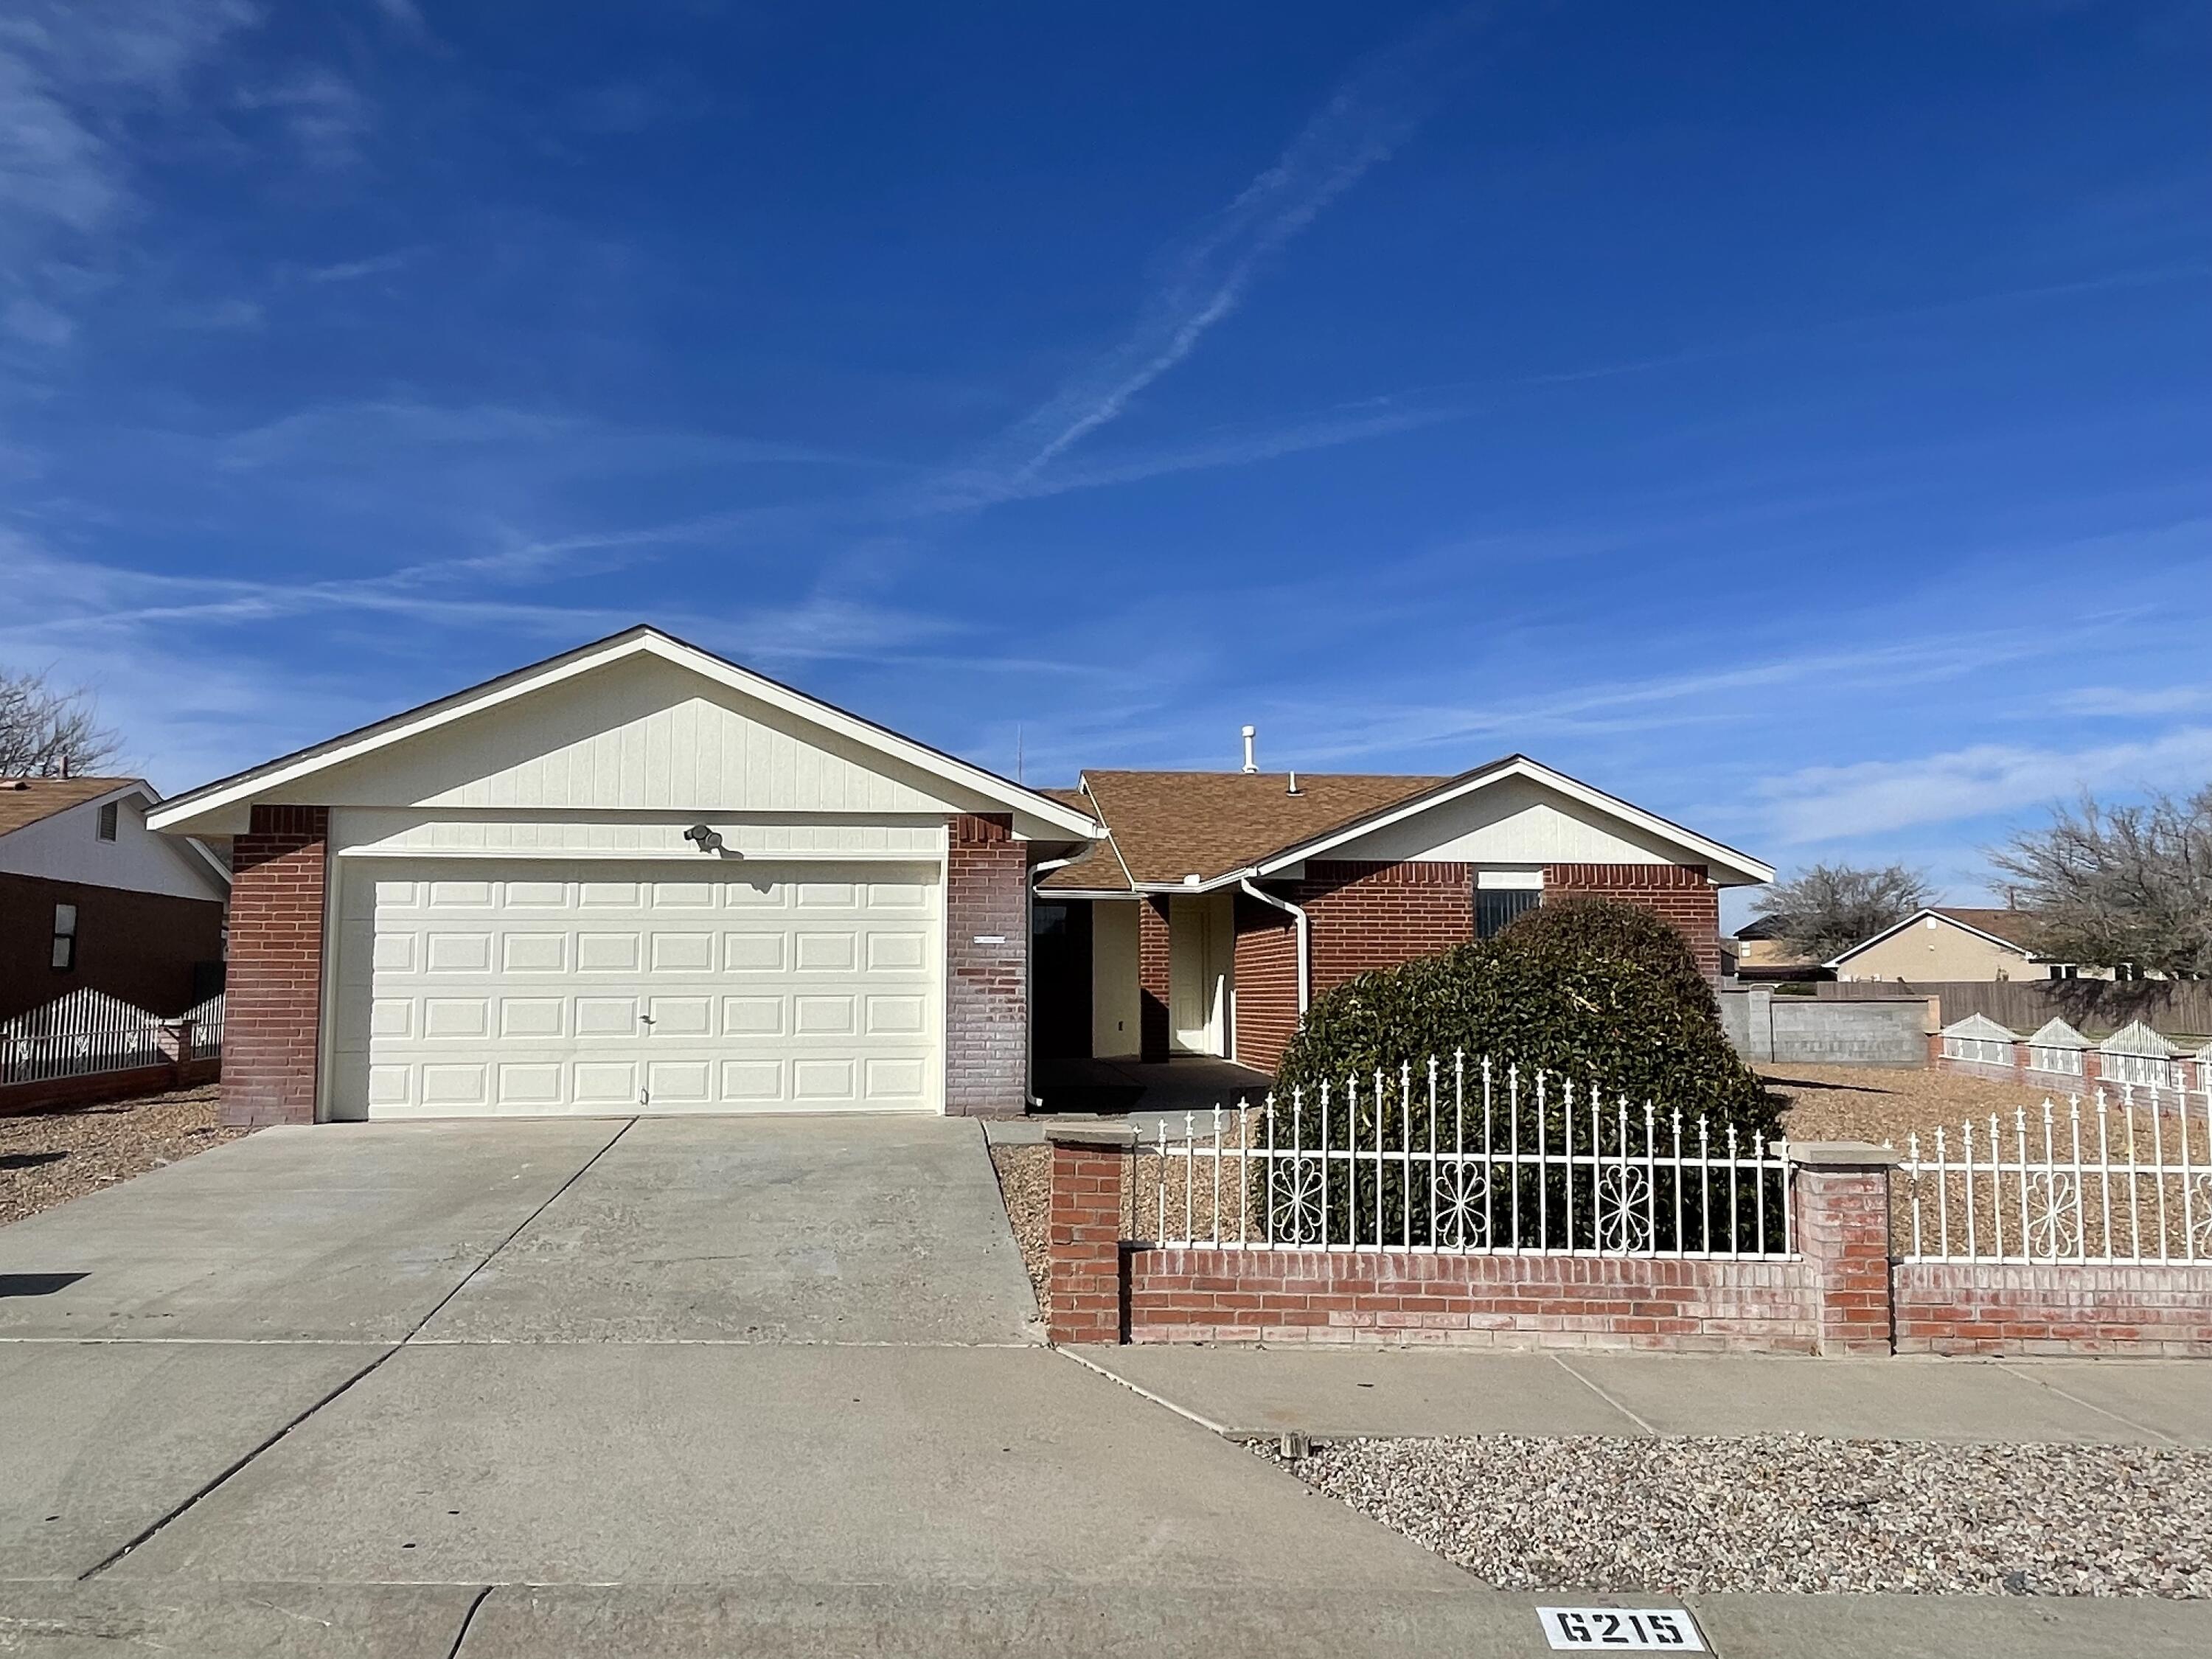 Great price on this all brick home in Taylor Ranch. Fresh paint throughout, ready to move into 4 Bedroom Home near Mariposa Park.  Two car garage and additional paved parking behind home. Refrigerator included. Price reflects flooring needs.